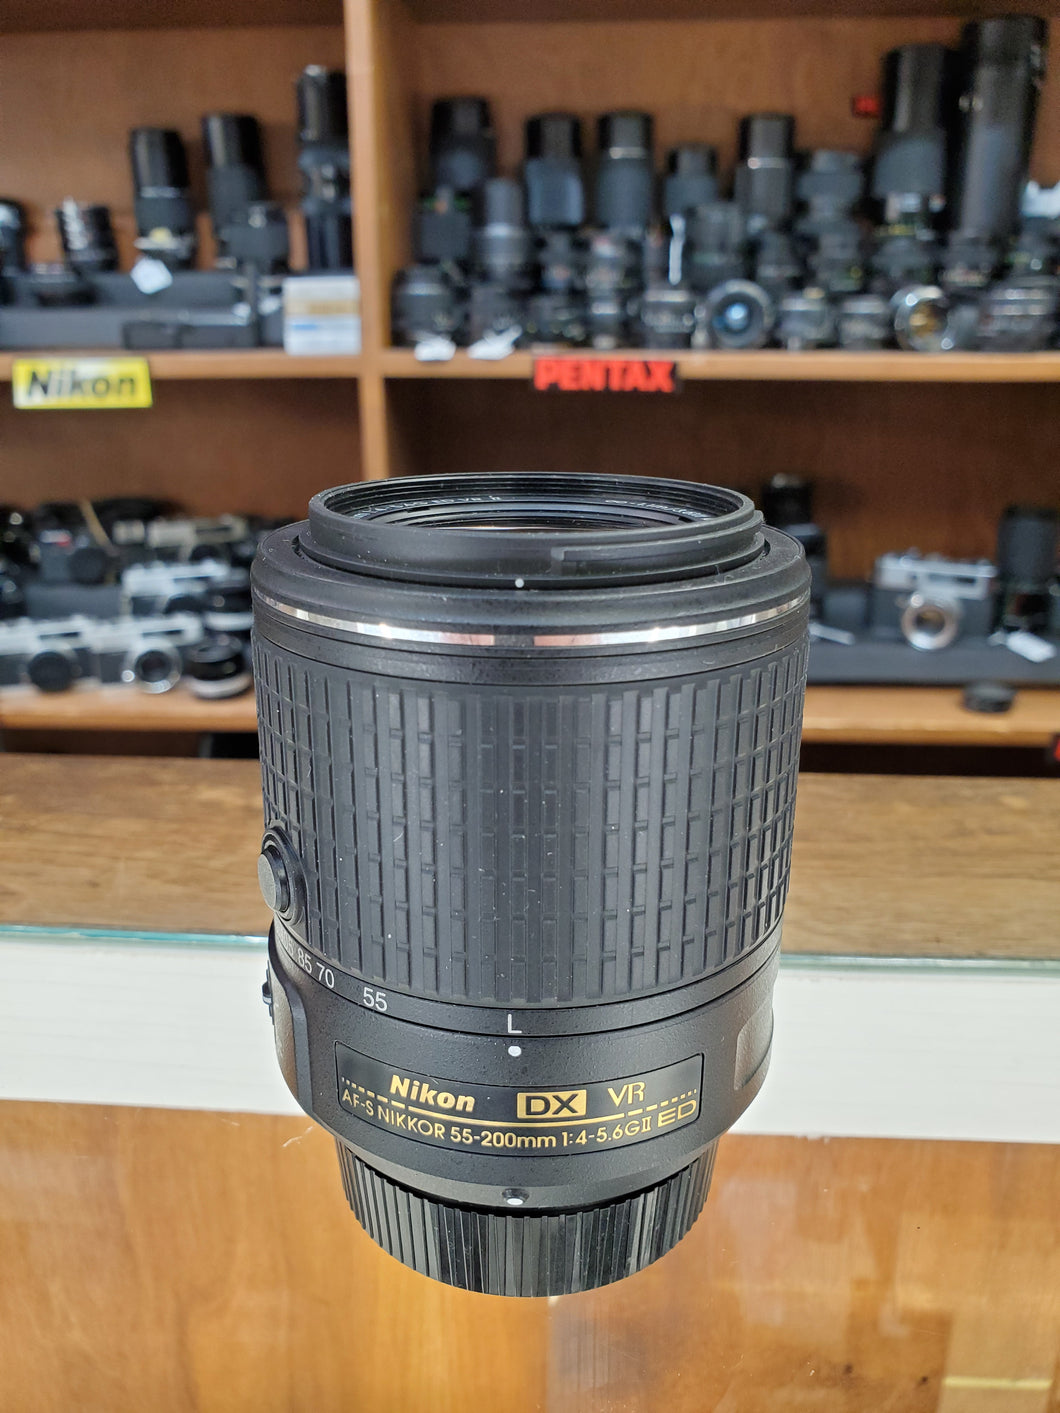 AF-S DX NIKKOR 55-200mm f/4-5.6G ED VR II  Lens - Used Condition 10/10 - Paramount Camera & Repair